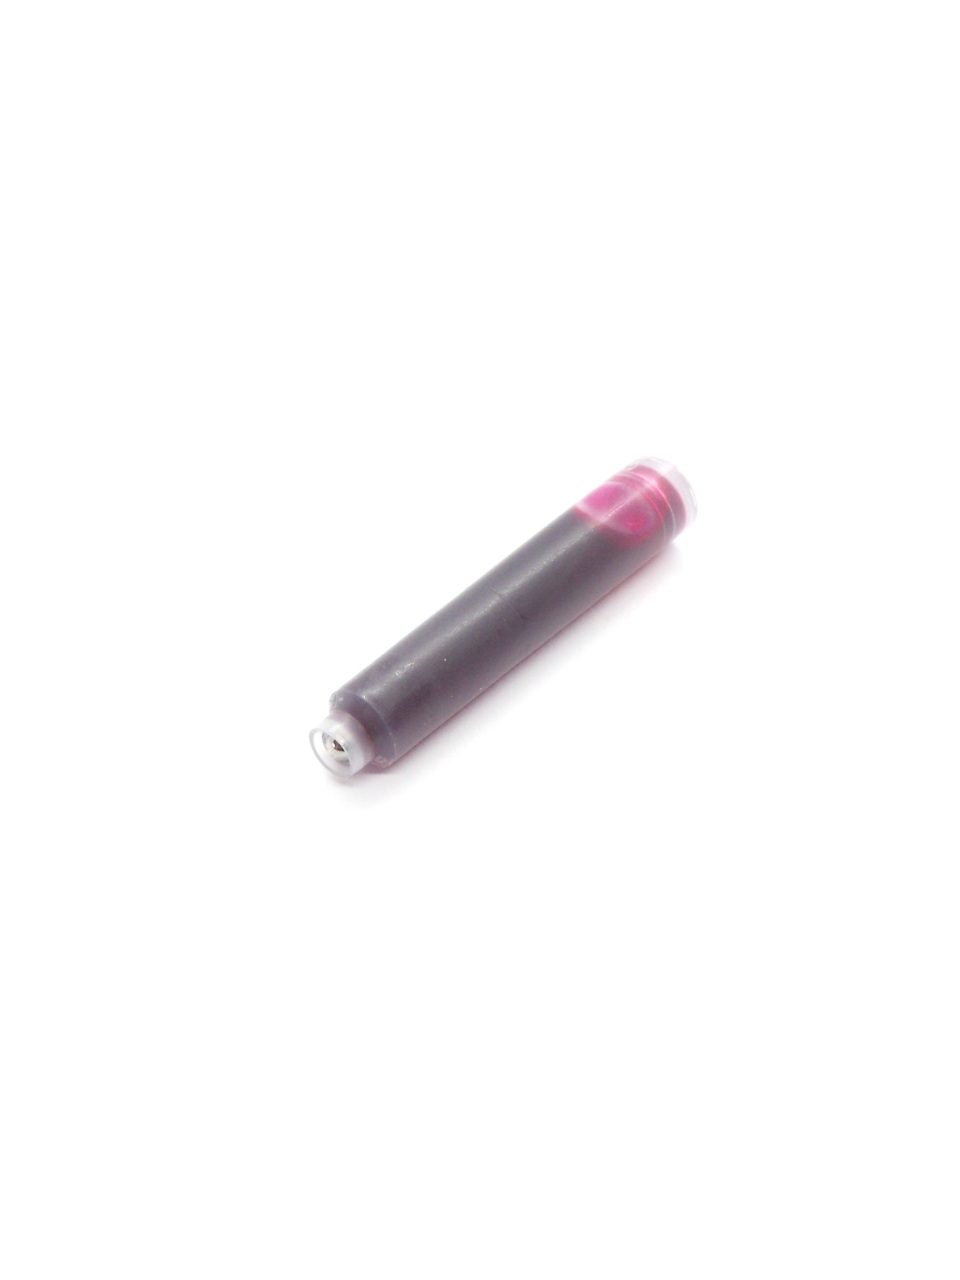 Cartridges For Laban Fountain Pens (Pink)